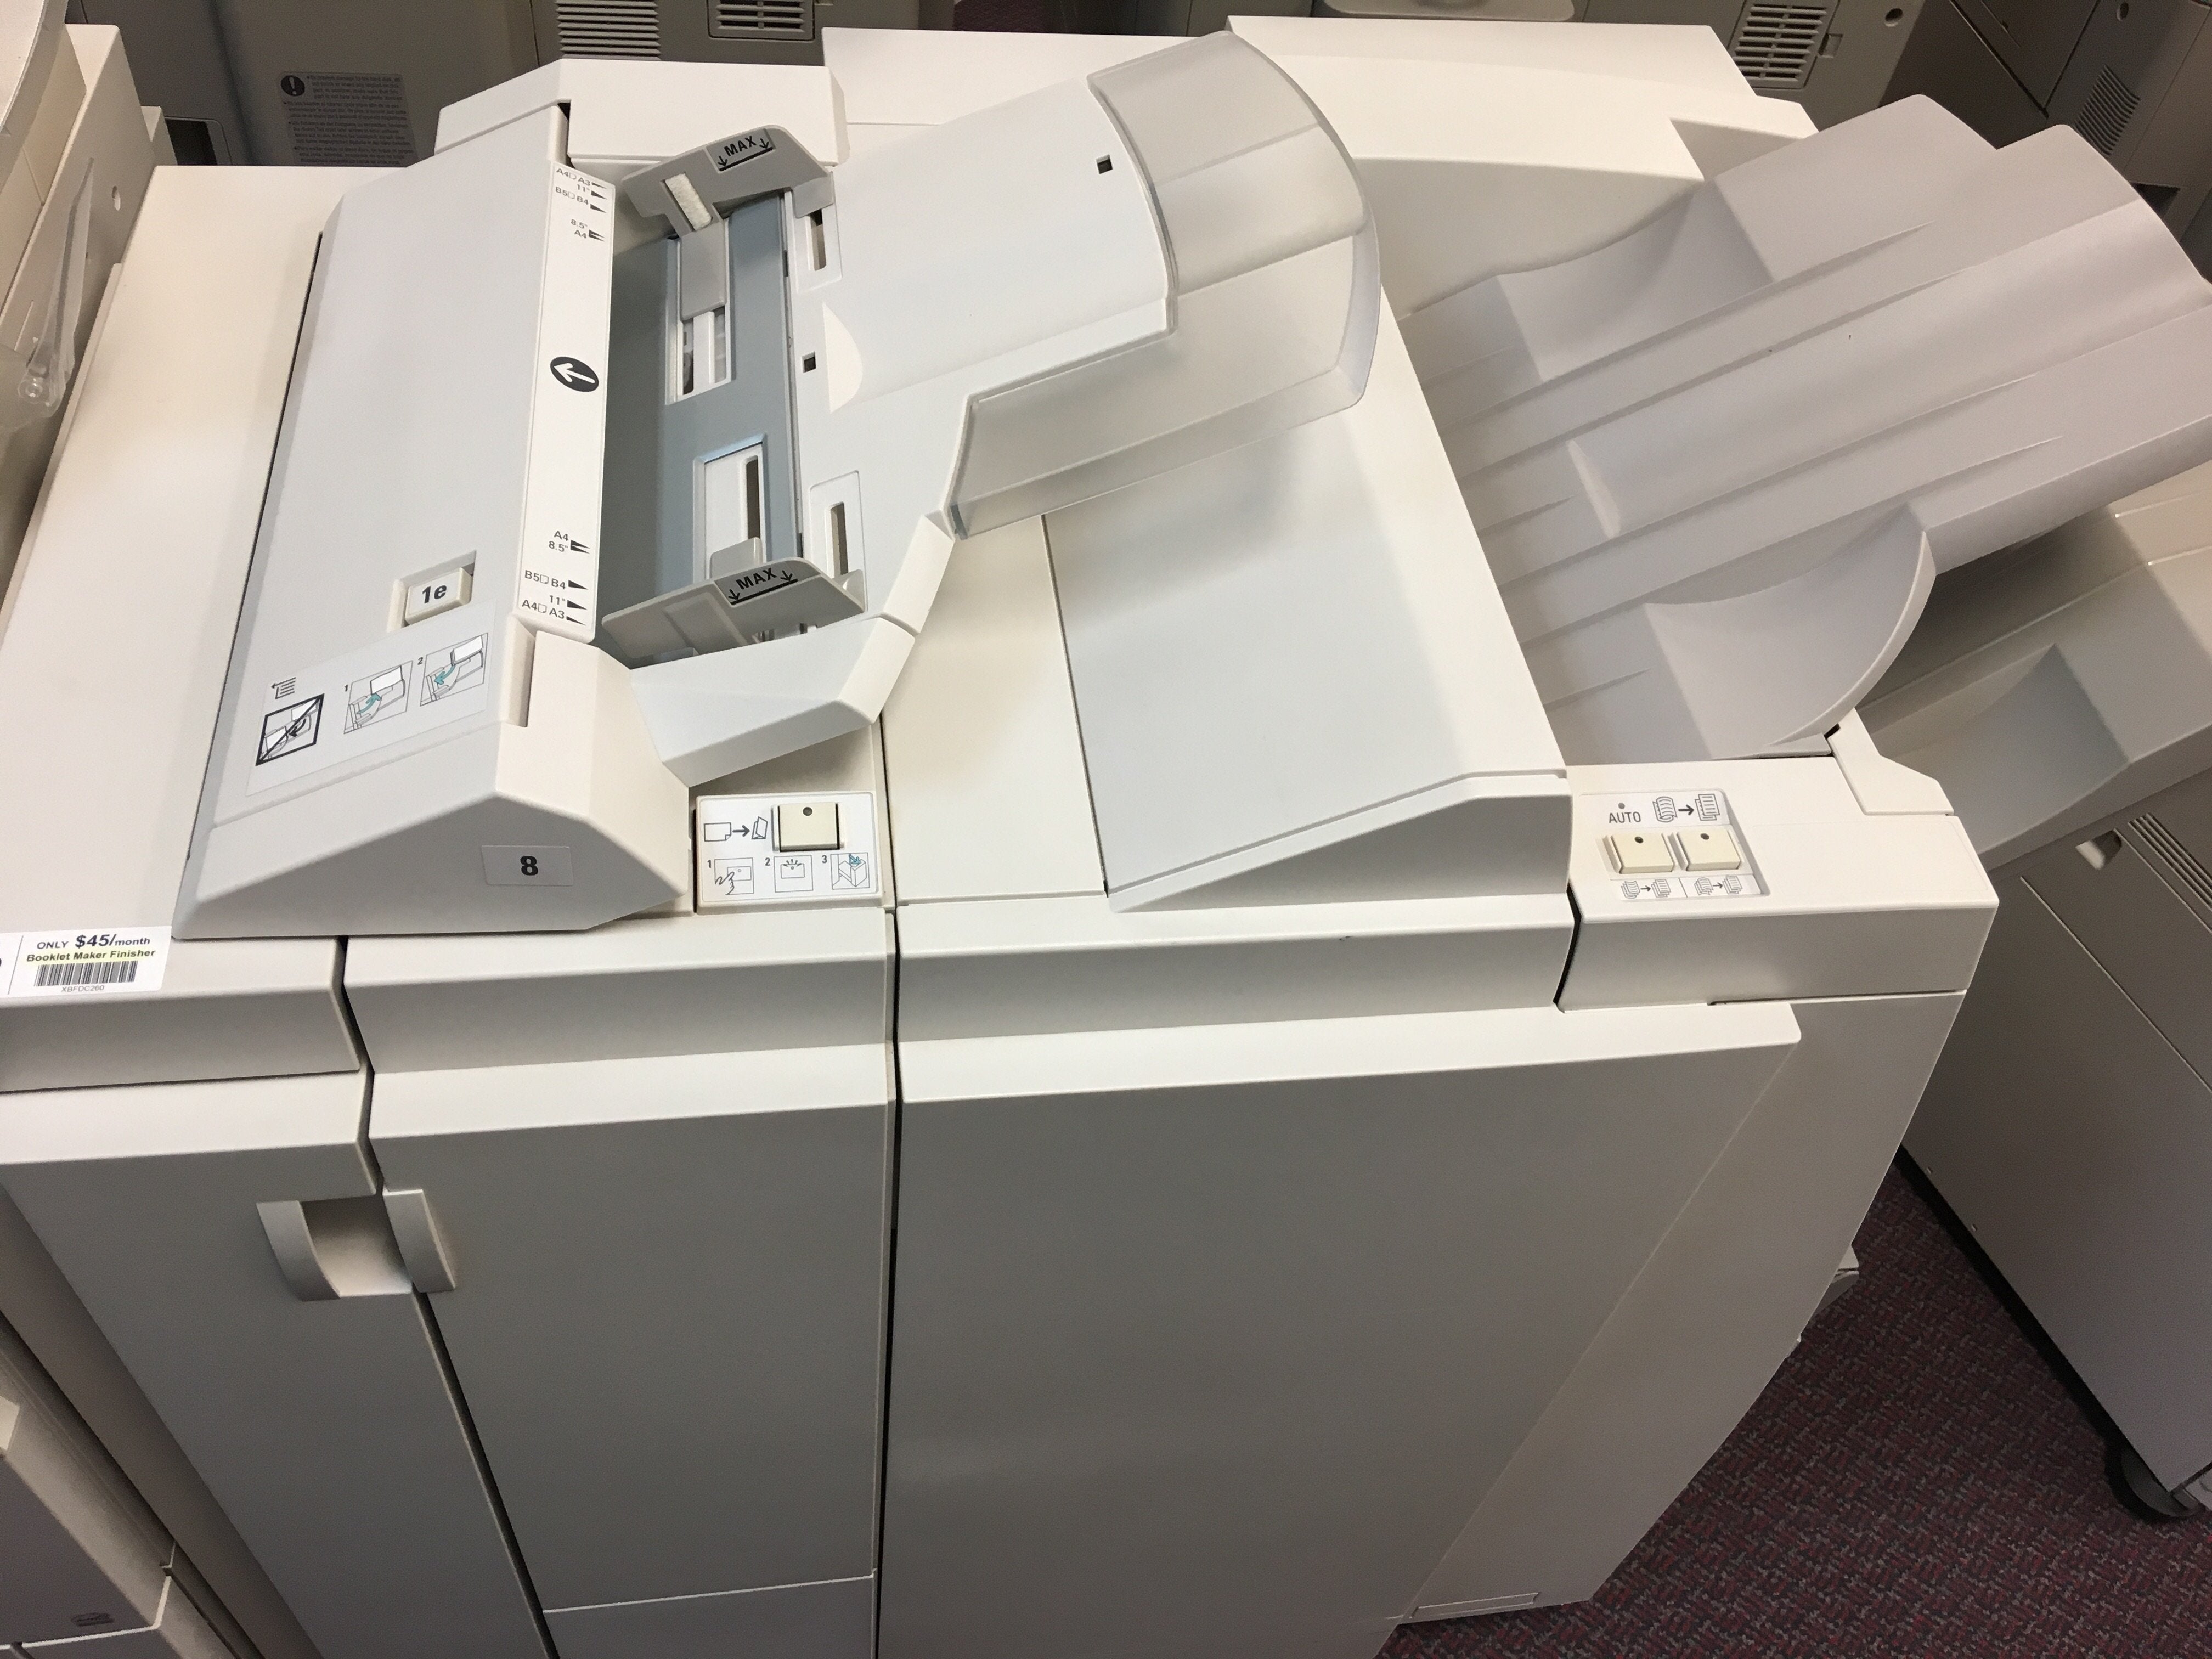 Absolute Toner Xerox DocuColor DC 260 Finisher with Booklet Maker Showroom Copier accessories